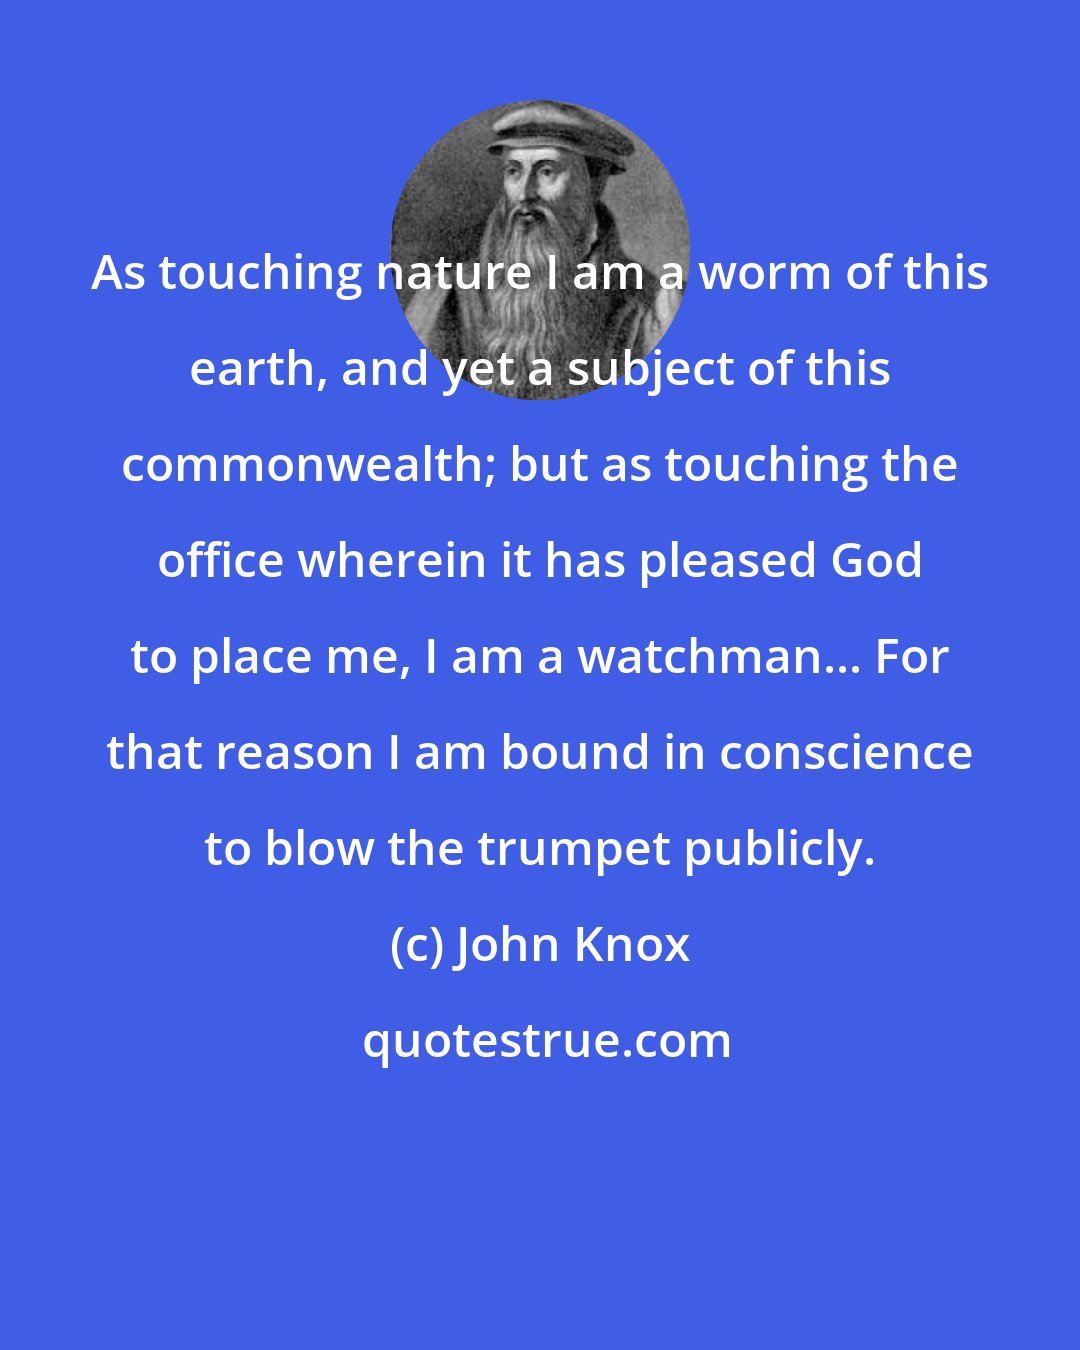 John Knox: As touching nature I am a worm of this earth, and yet a subject of this commonwealth; but as touching the office wherein it has pleased God to place me, I am a watchman... For that reason I am bound in conscience to blow the trumpet publicly.